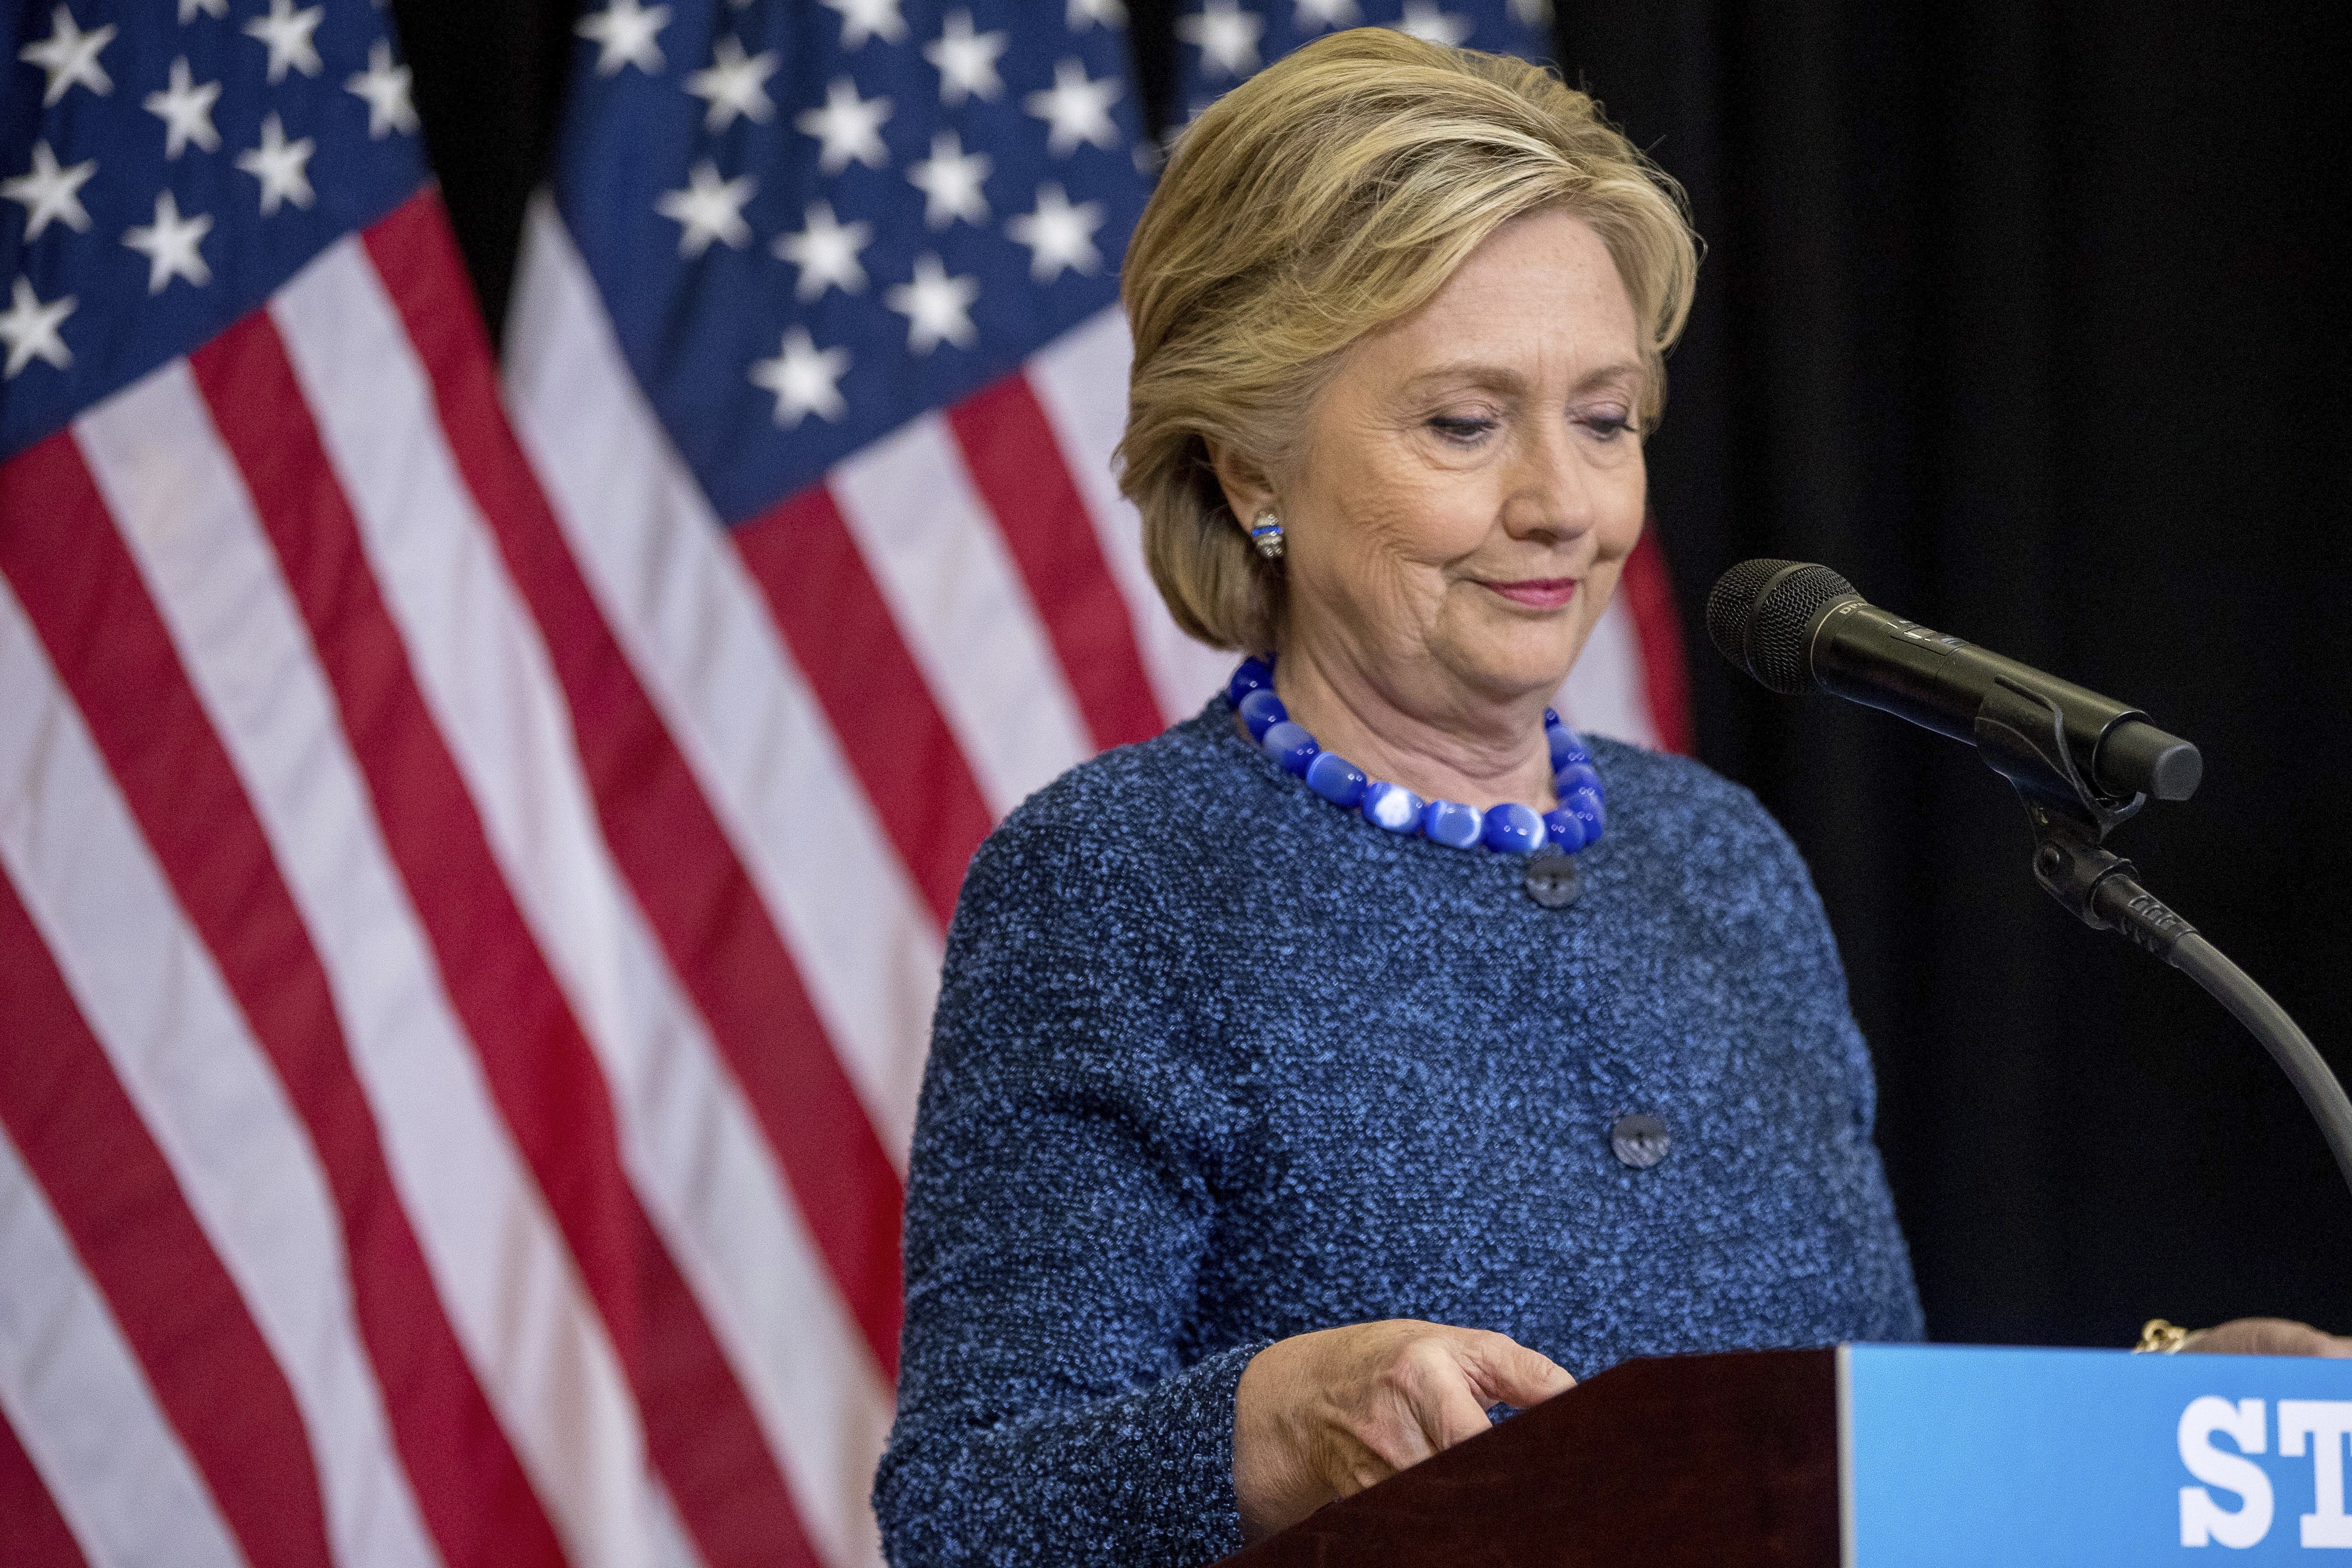 Clinton takes on FBI director in latest email flap